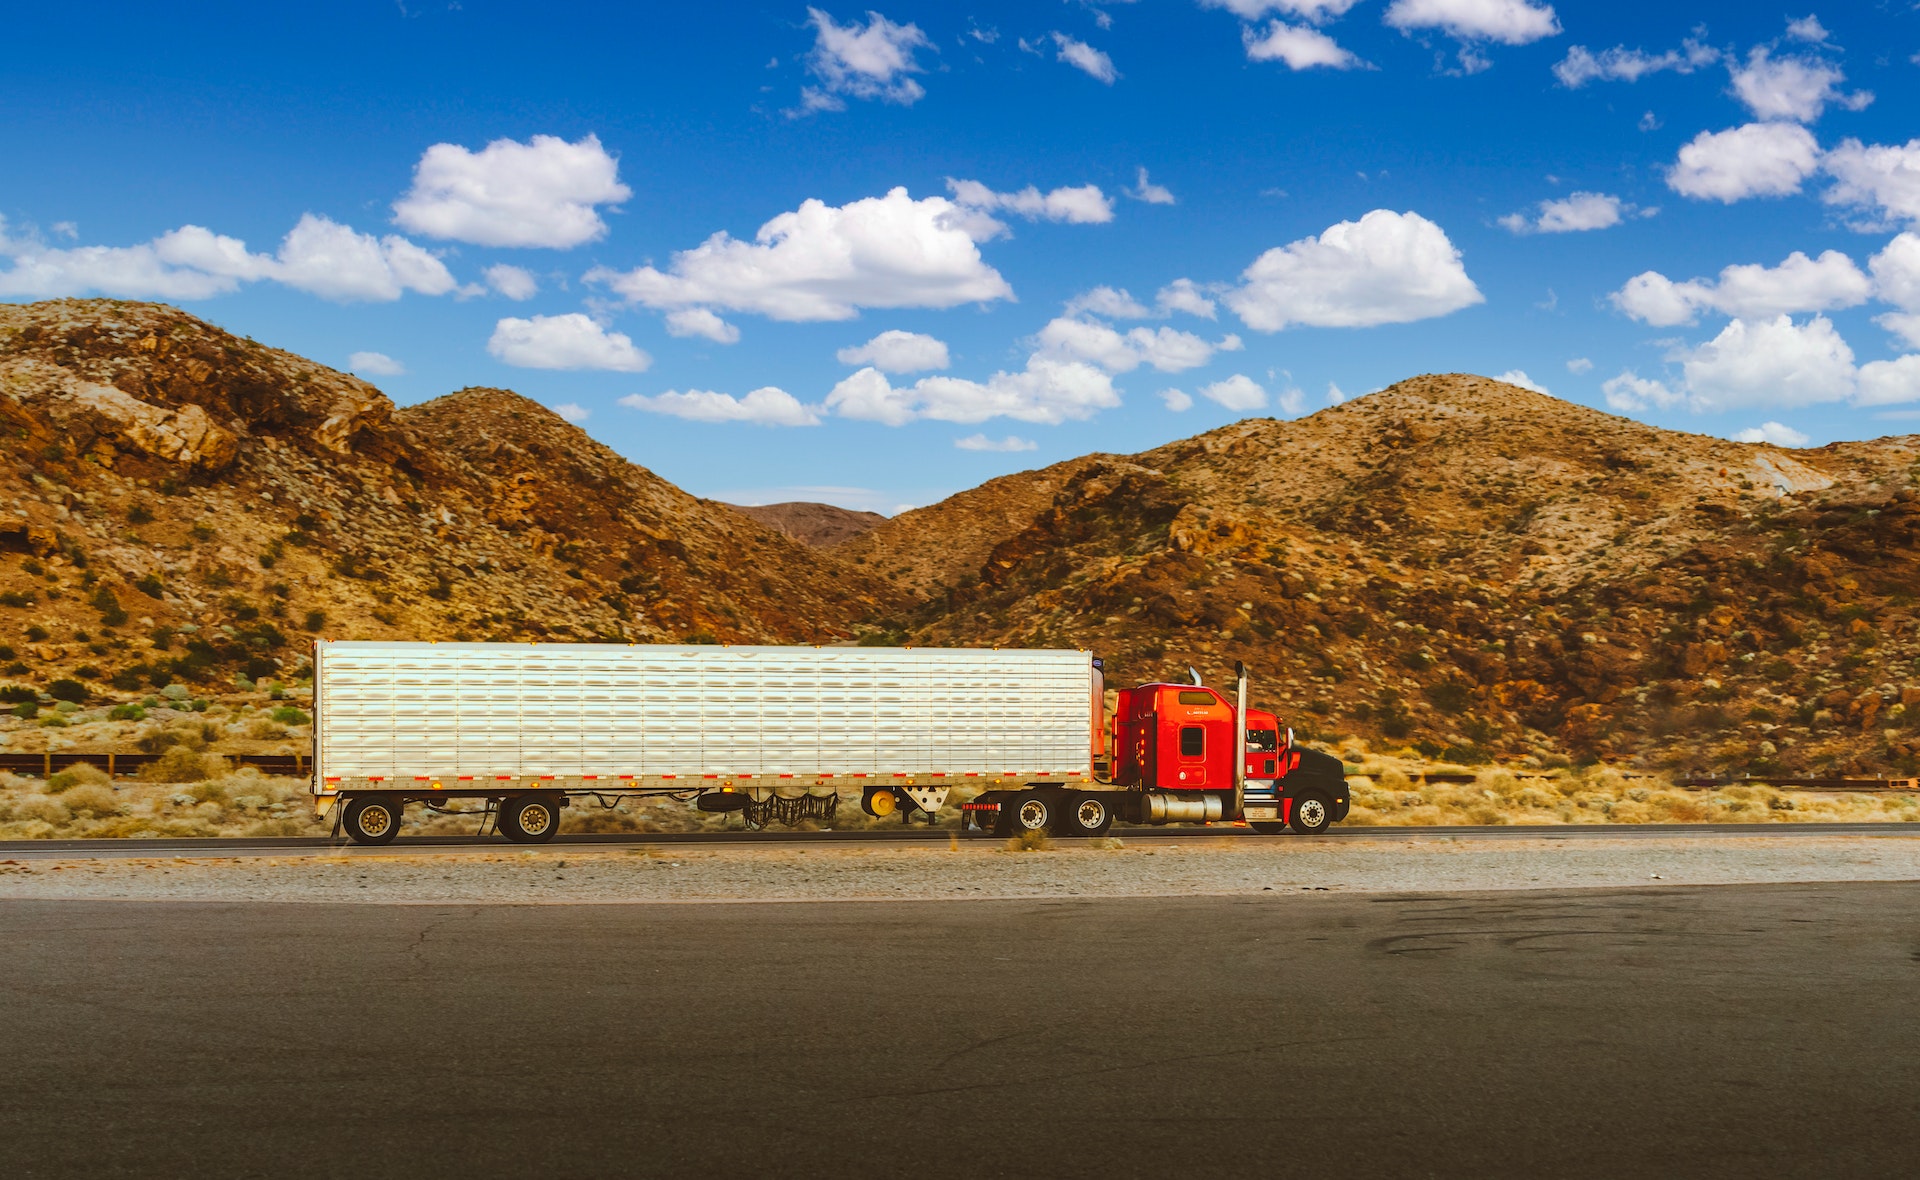 Illustrating application modernization service case study is an image of truck pulled over to the side of the road with mountains in the background